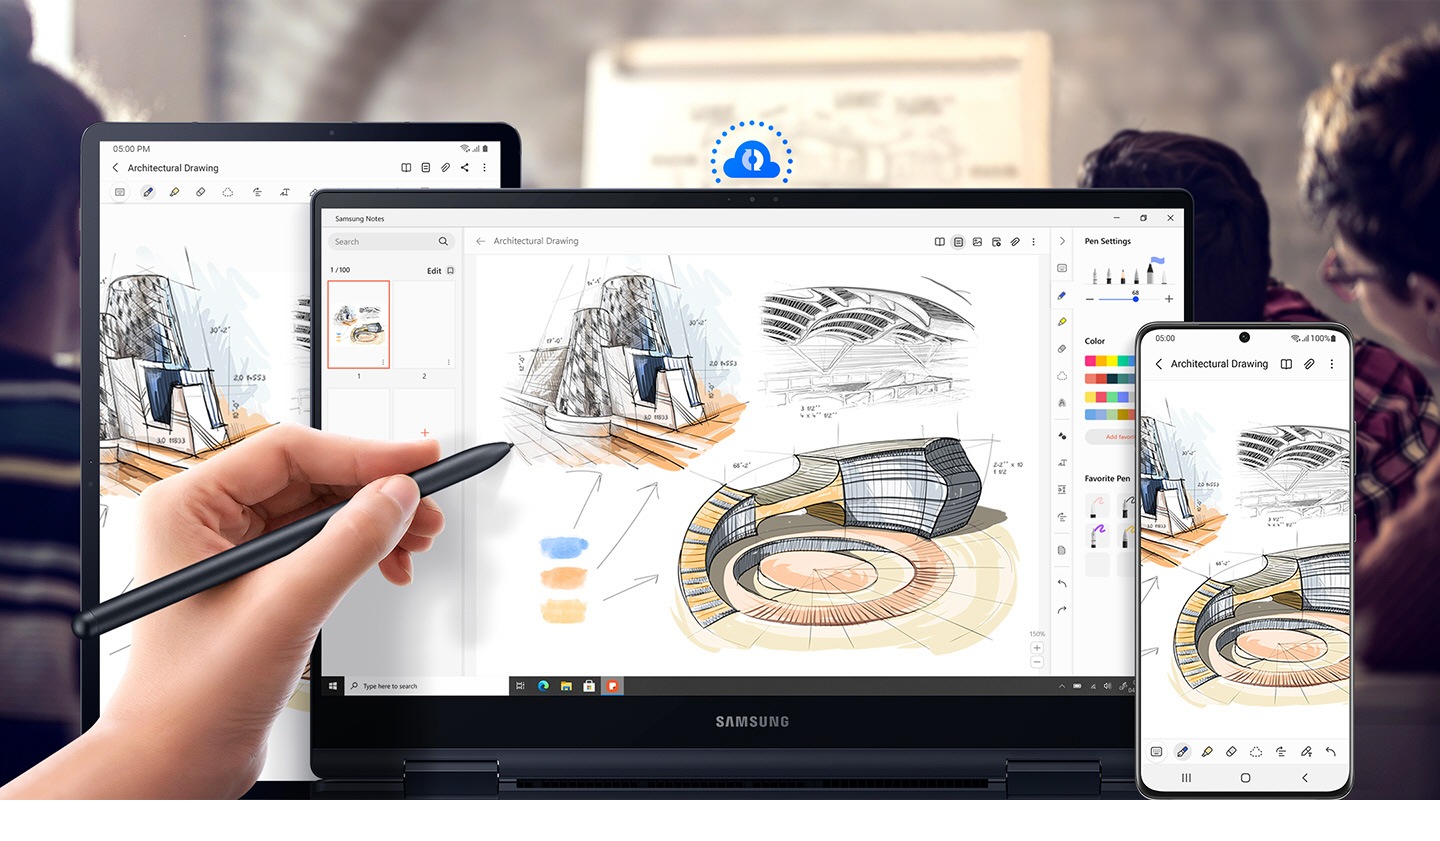 Galaxy Book Pro 360 placed in the center with a hand drawing in real-time, and a mobile phone and Galaxy Tab S7 are placed side by side. Displayed on all three screens is an architectural drawing, demonstrating that the devices are auto-synced via Samsung Notes.